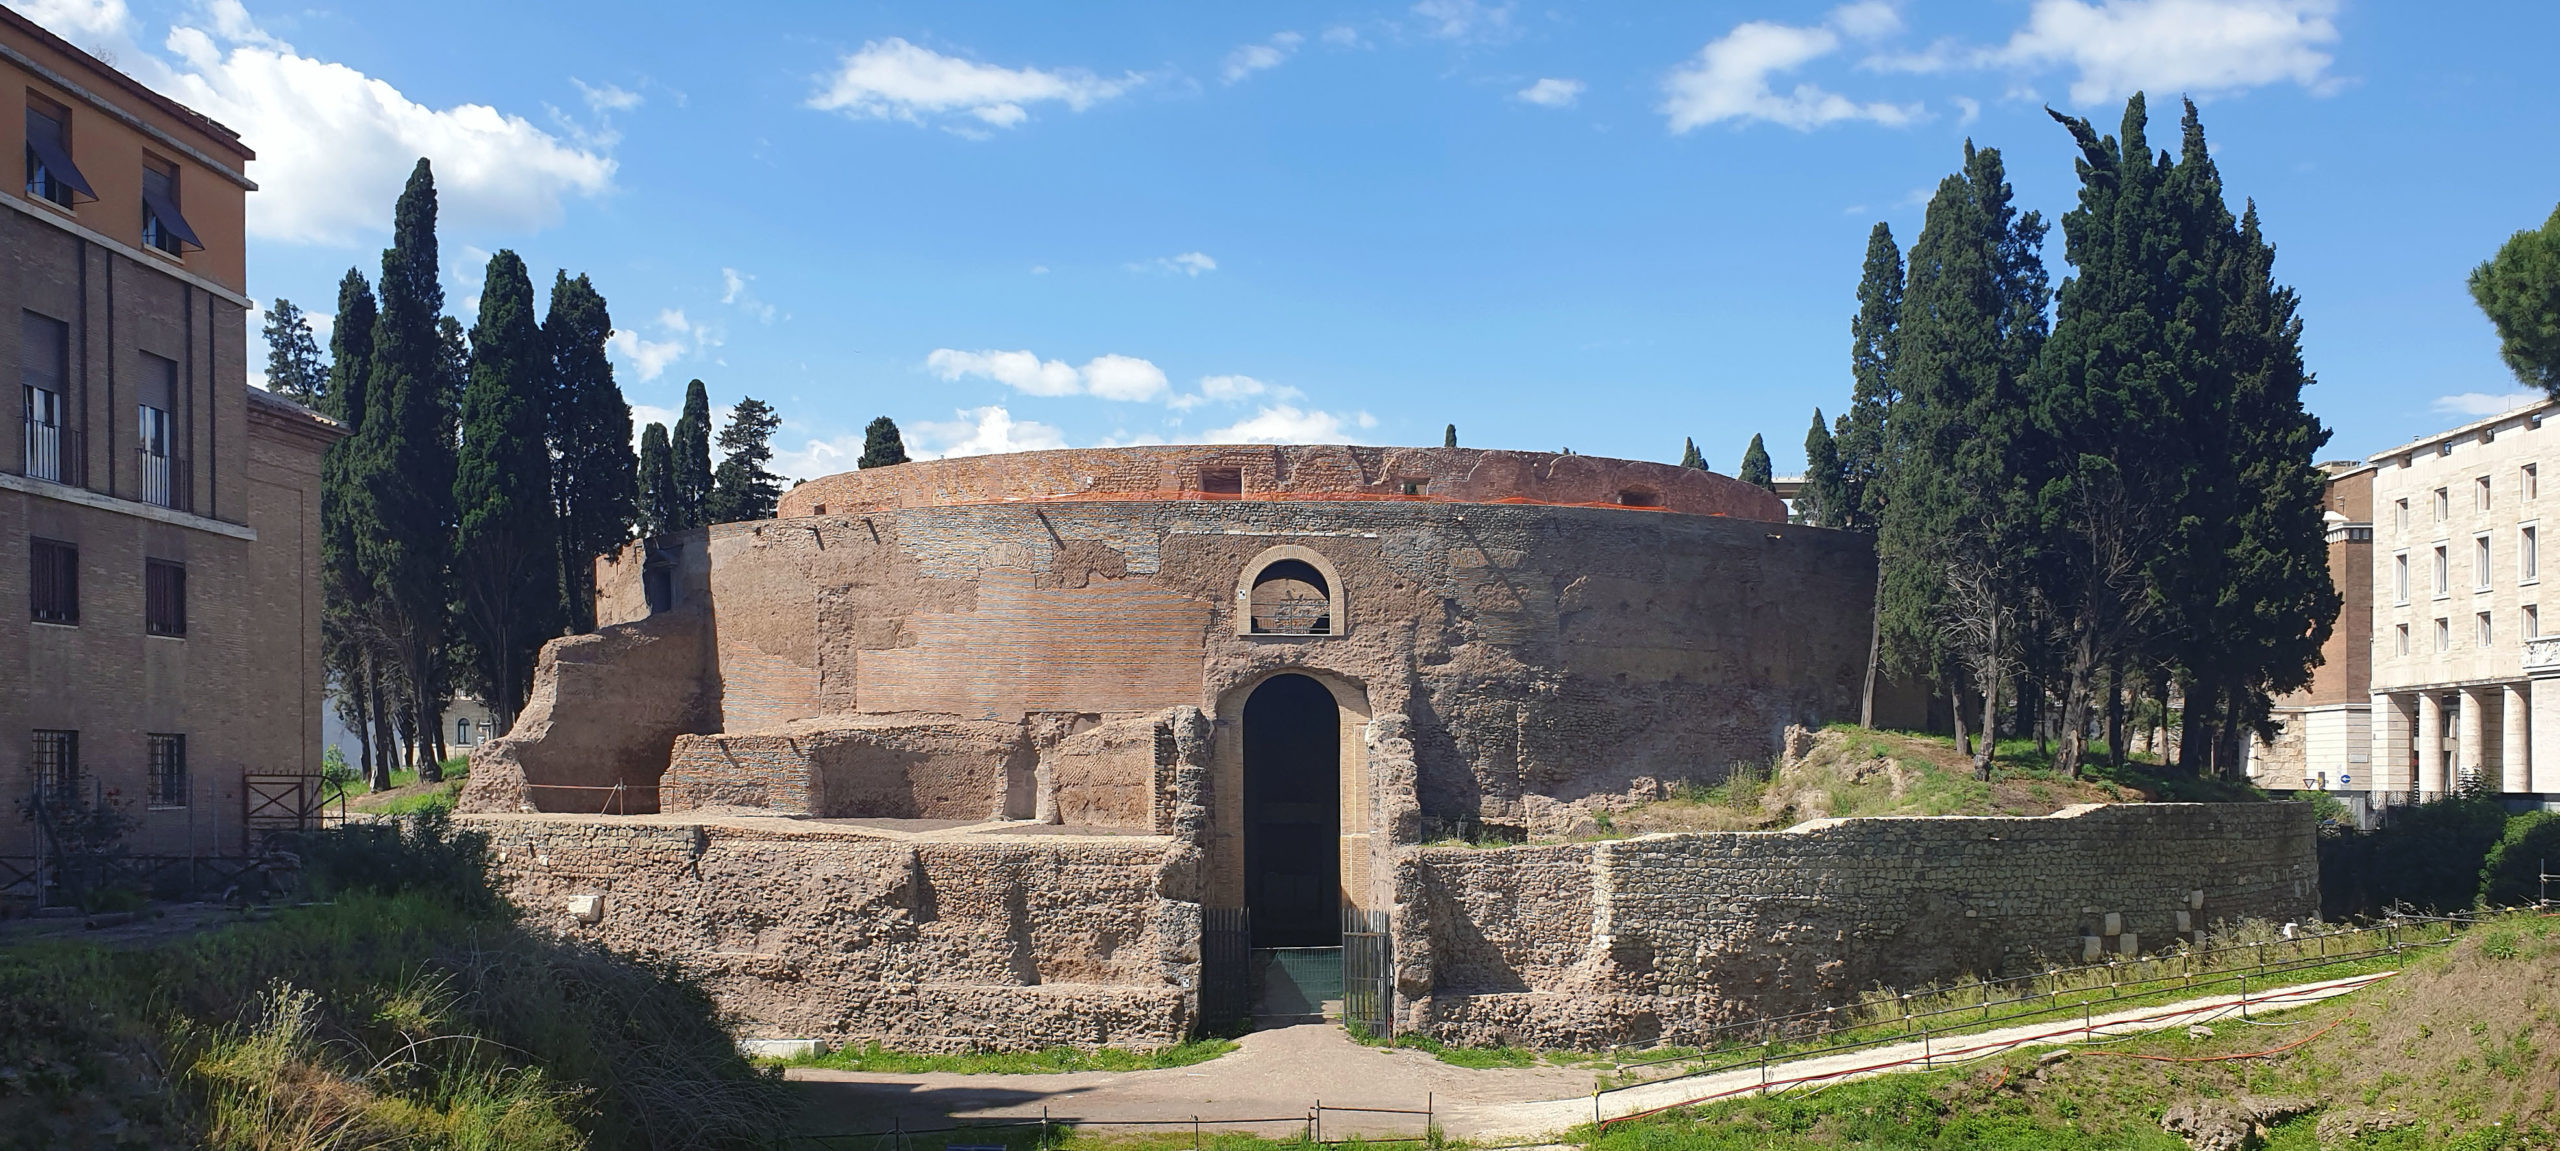 Ruins of the Mausoleum of Augustus, 28 B.C.E. as it appeared in 2019 (photo: Jamie Heath, CC BY-SA 2.0)